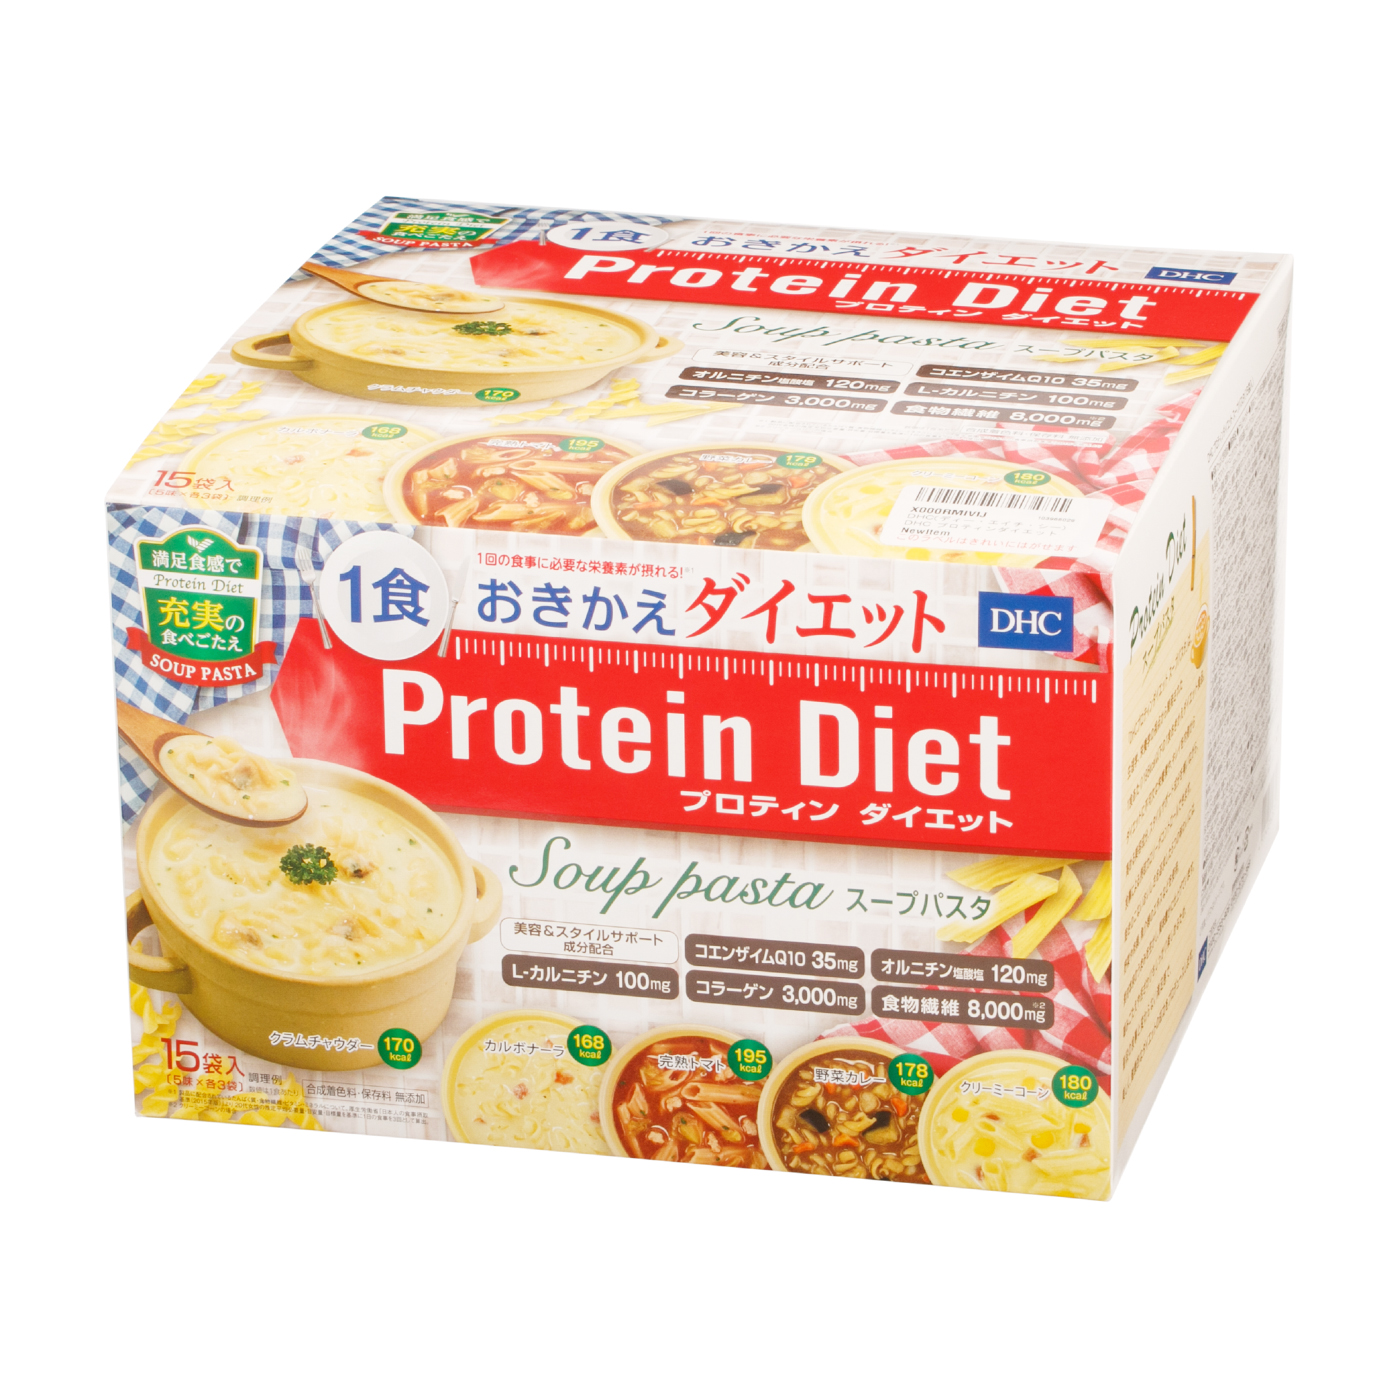 DHC プロティンダイエットスープパスタ 15食分入 (Protein Diet ...